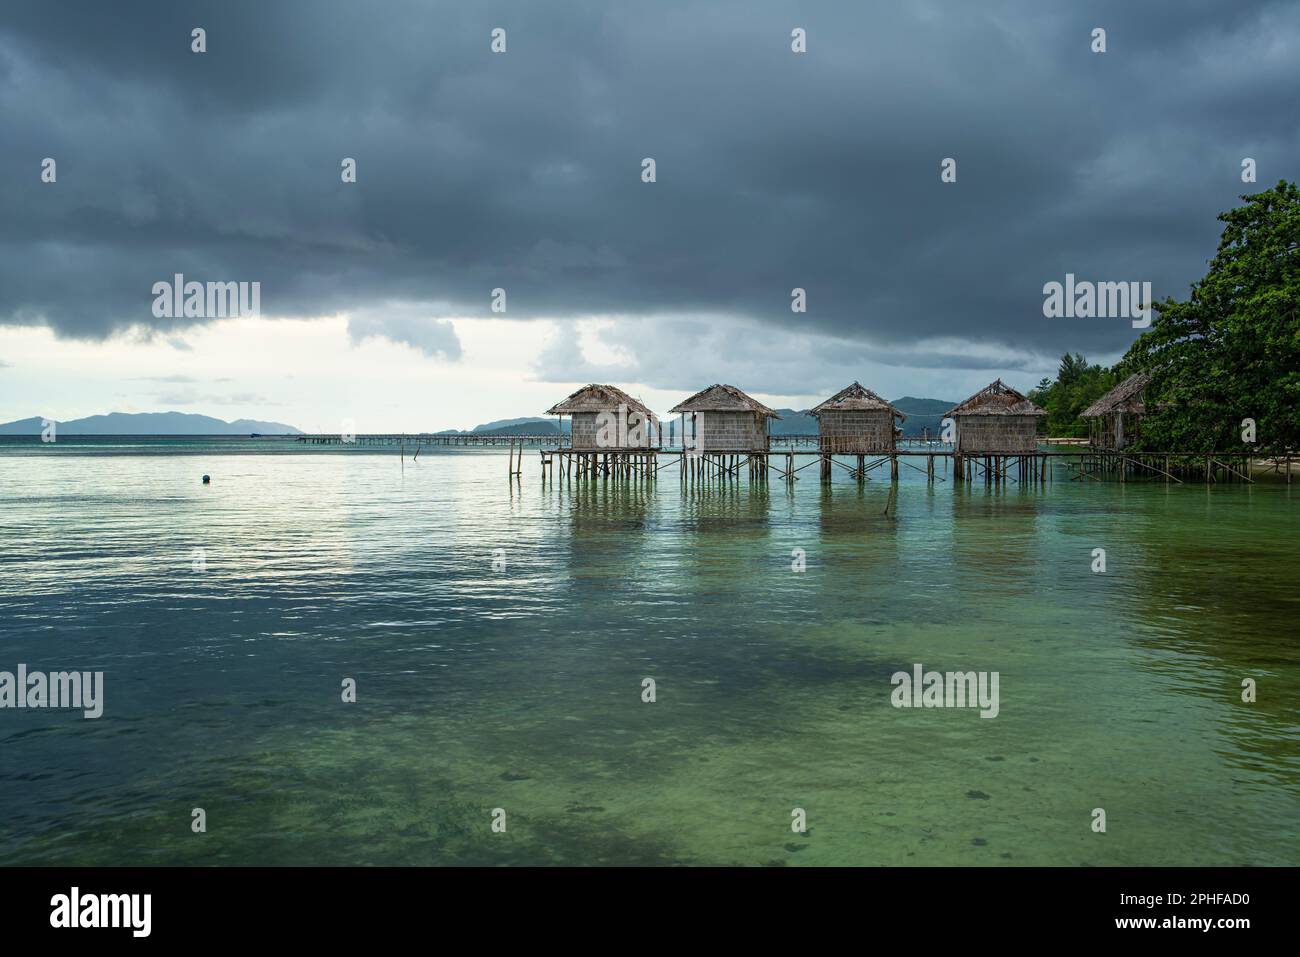 Destroyed water house on the coast of the village of Saporkren Waisai, Raja Ampat, background cloudy sky Stock Photo